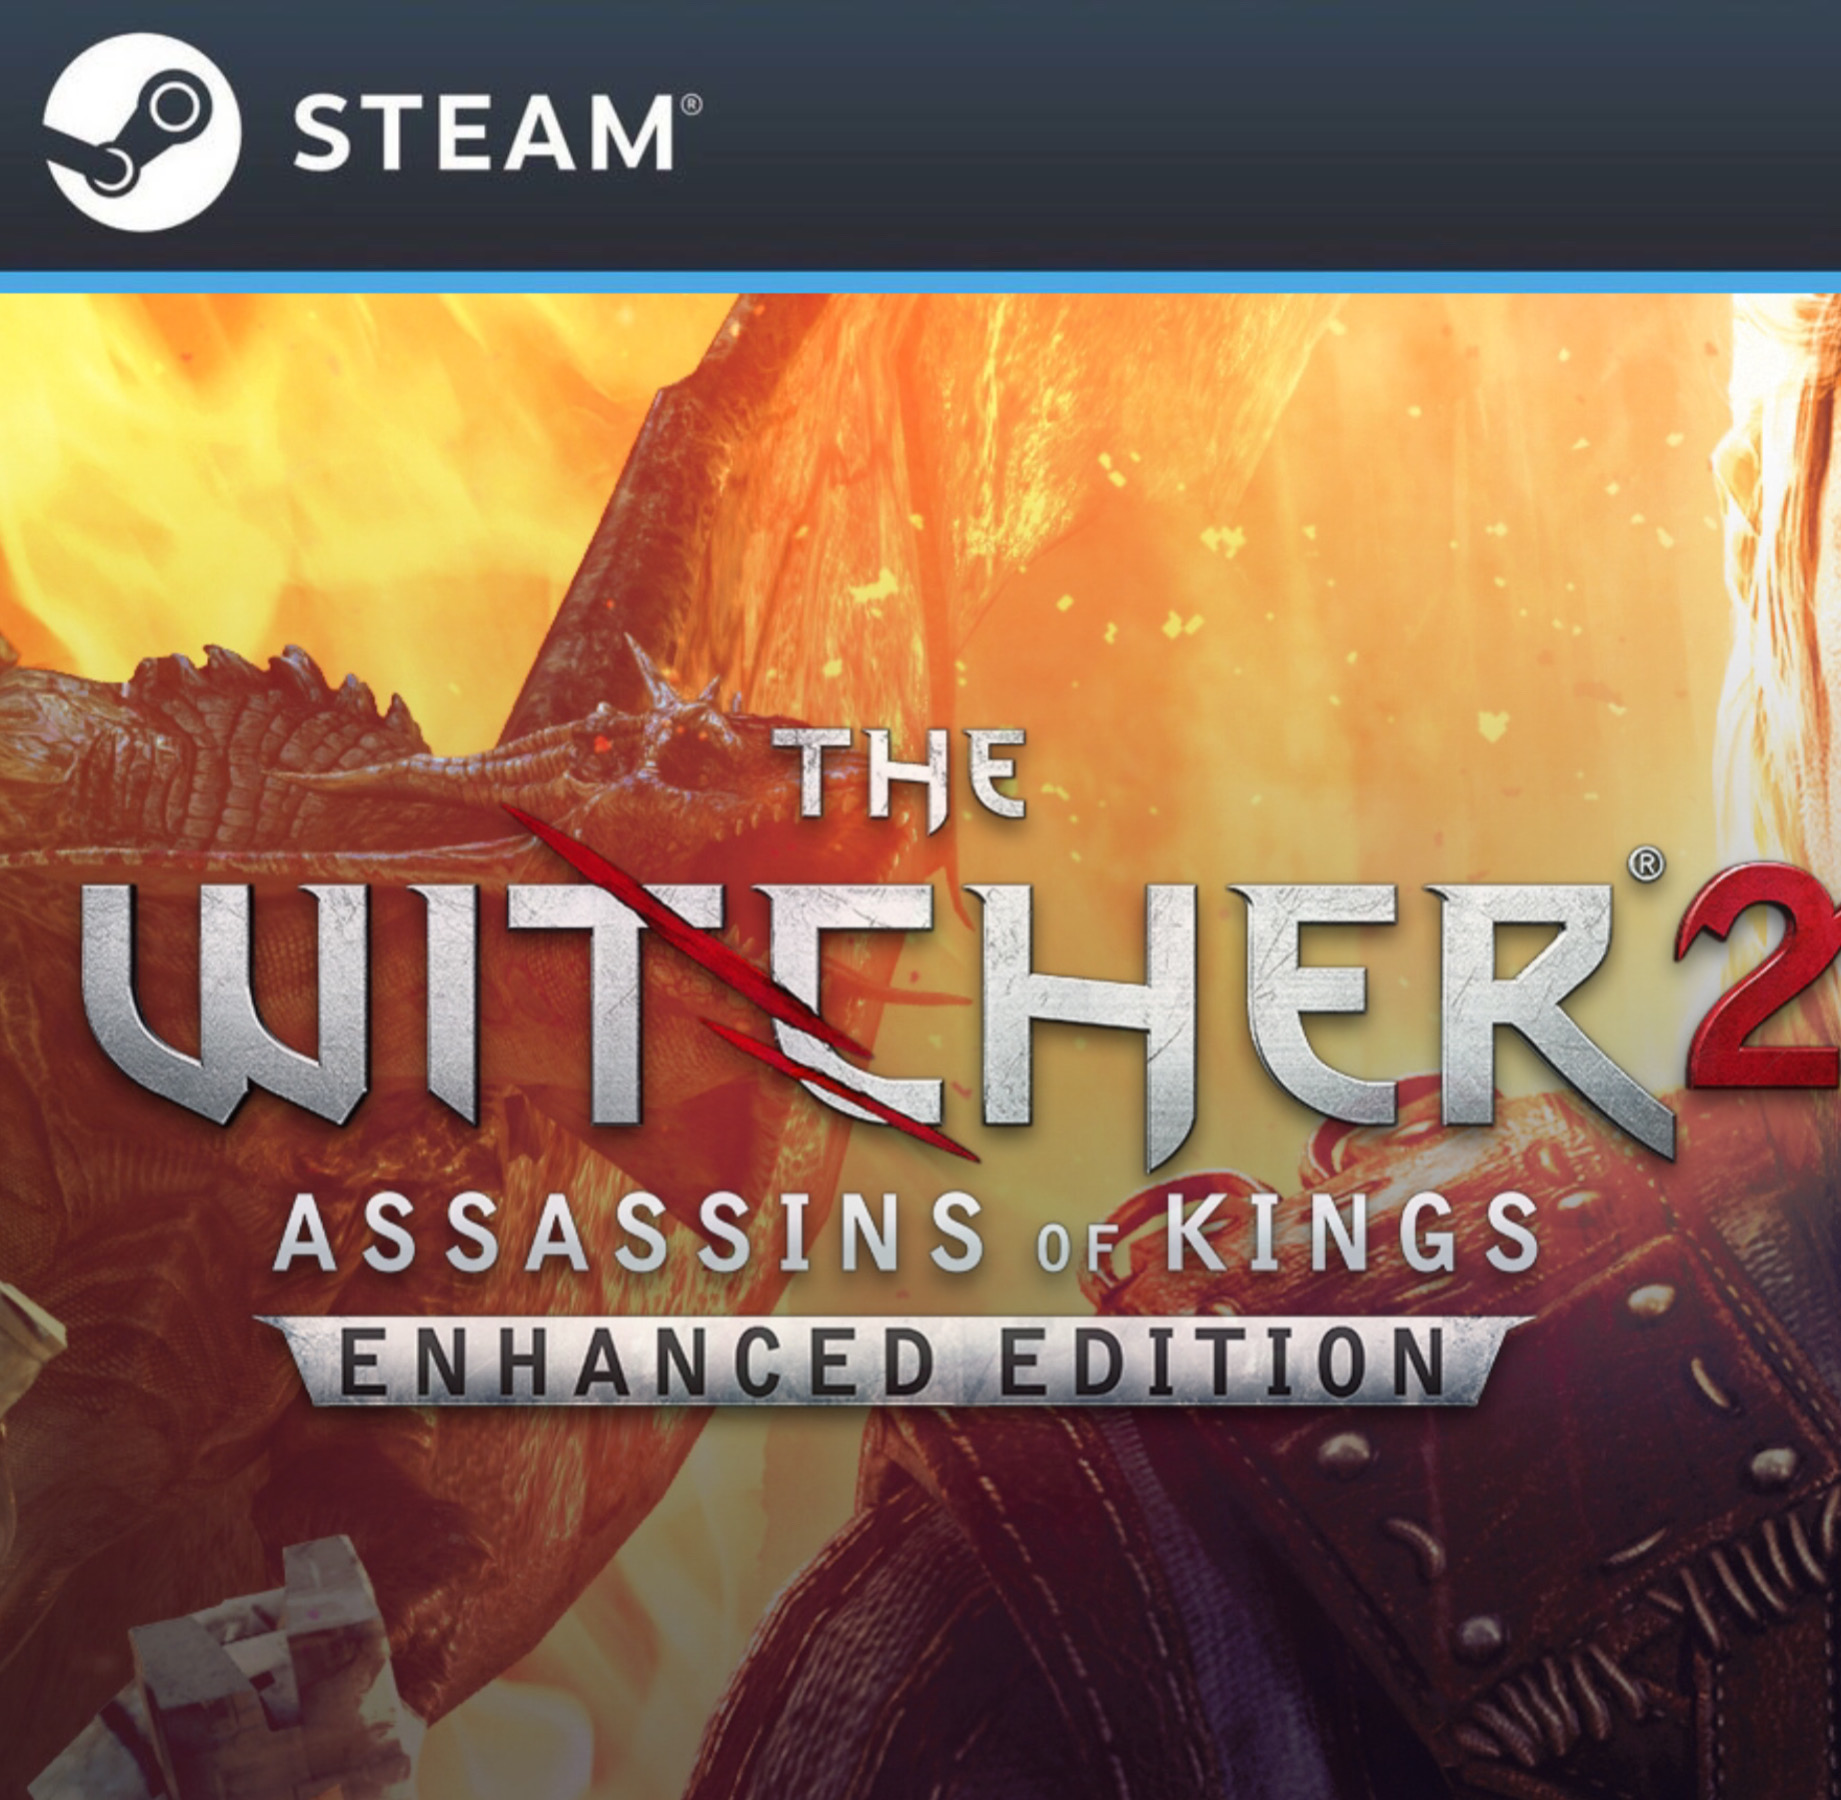 Witcher 2 assassins of kings steam фото 114